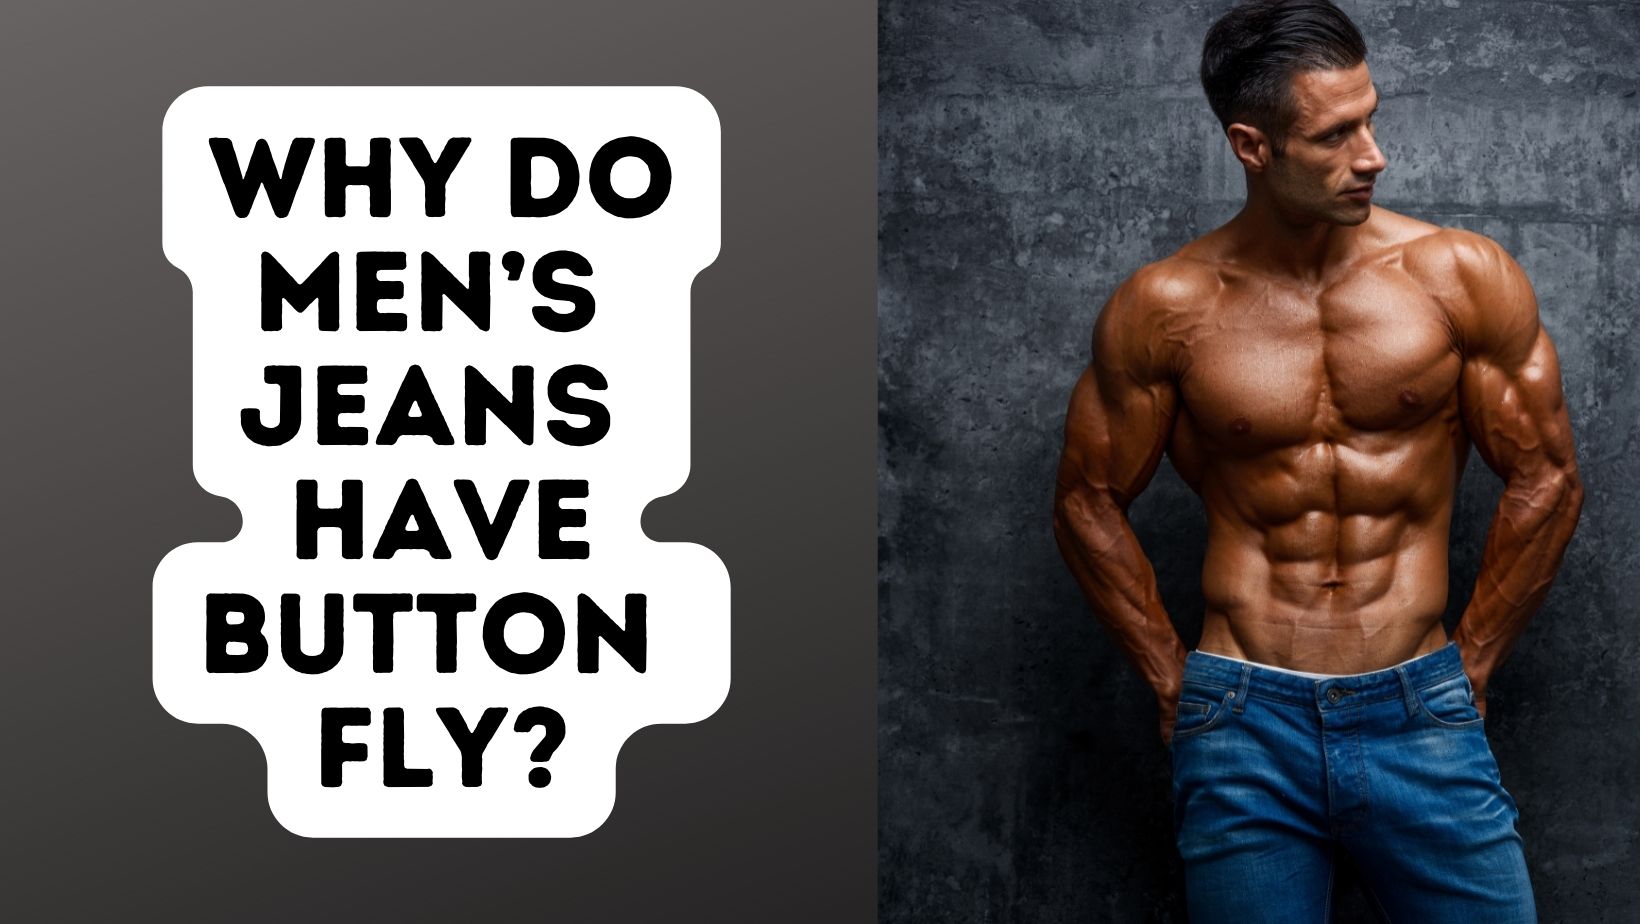 Why Do Men’s Jeans Have Button Fly?